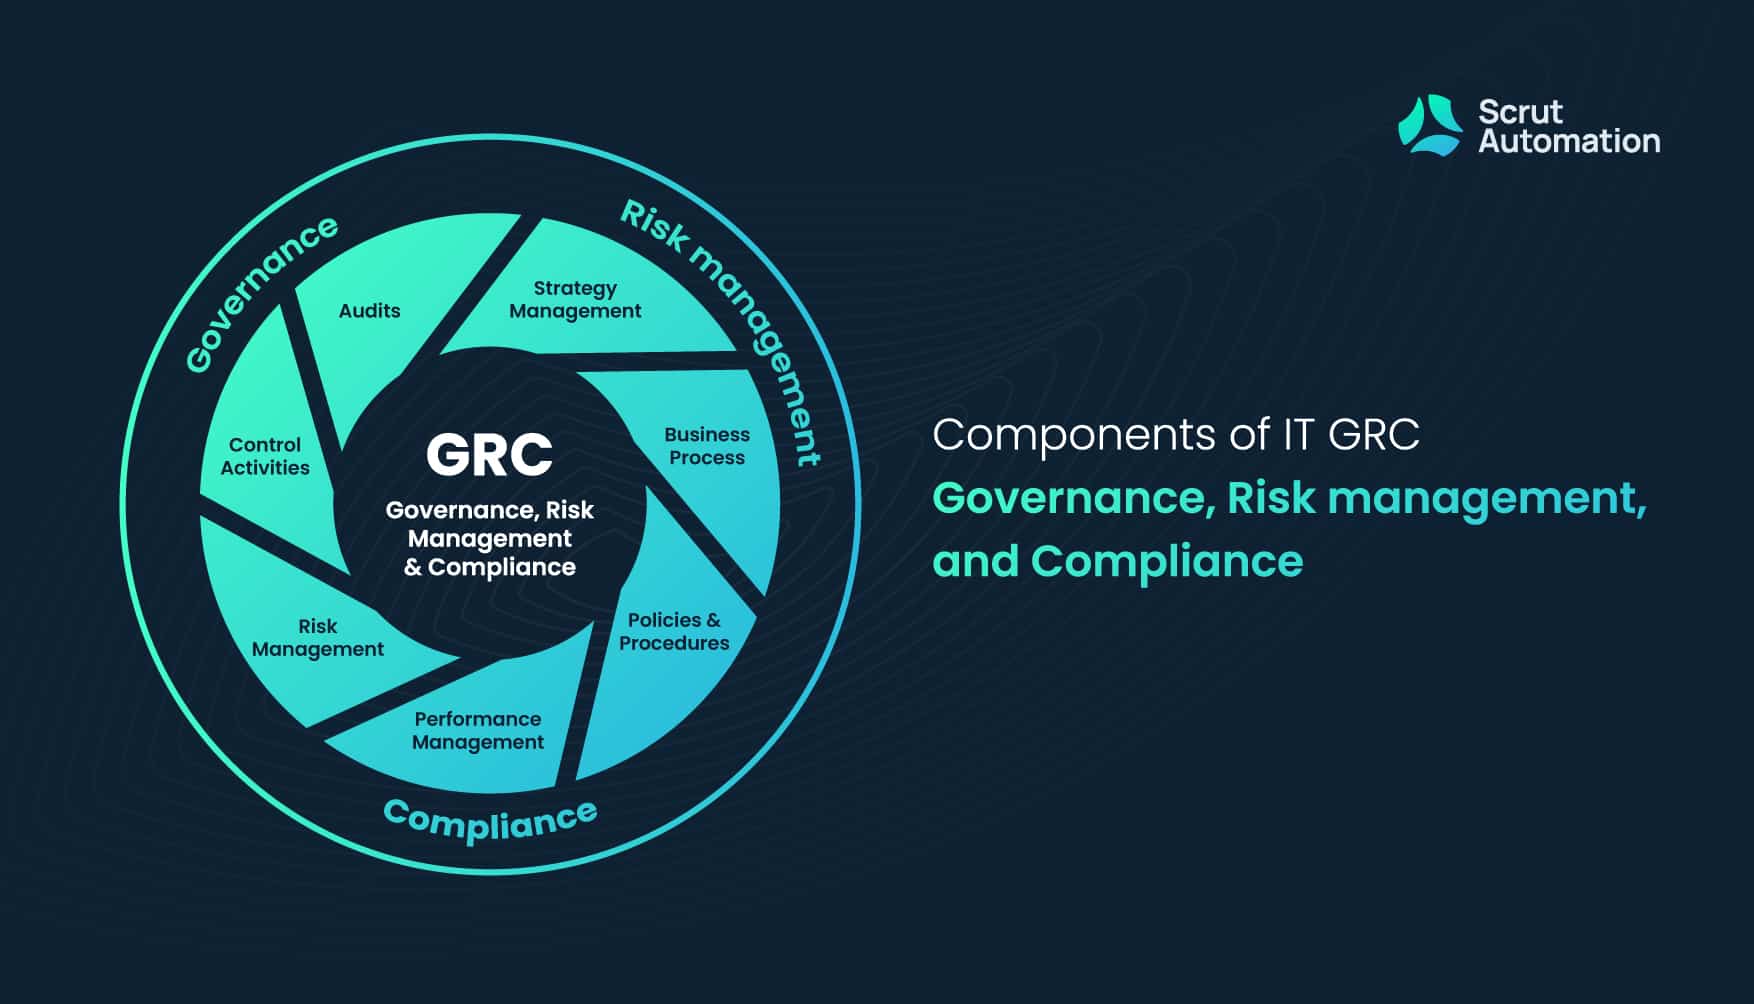 Best Practices for Achieving Effective IT GRC: A Guide to Dos and Don'ts